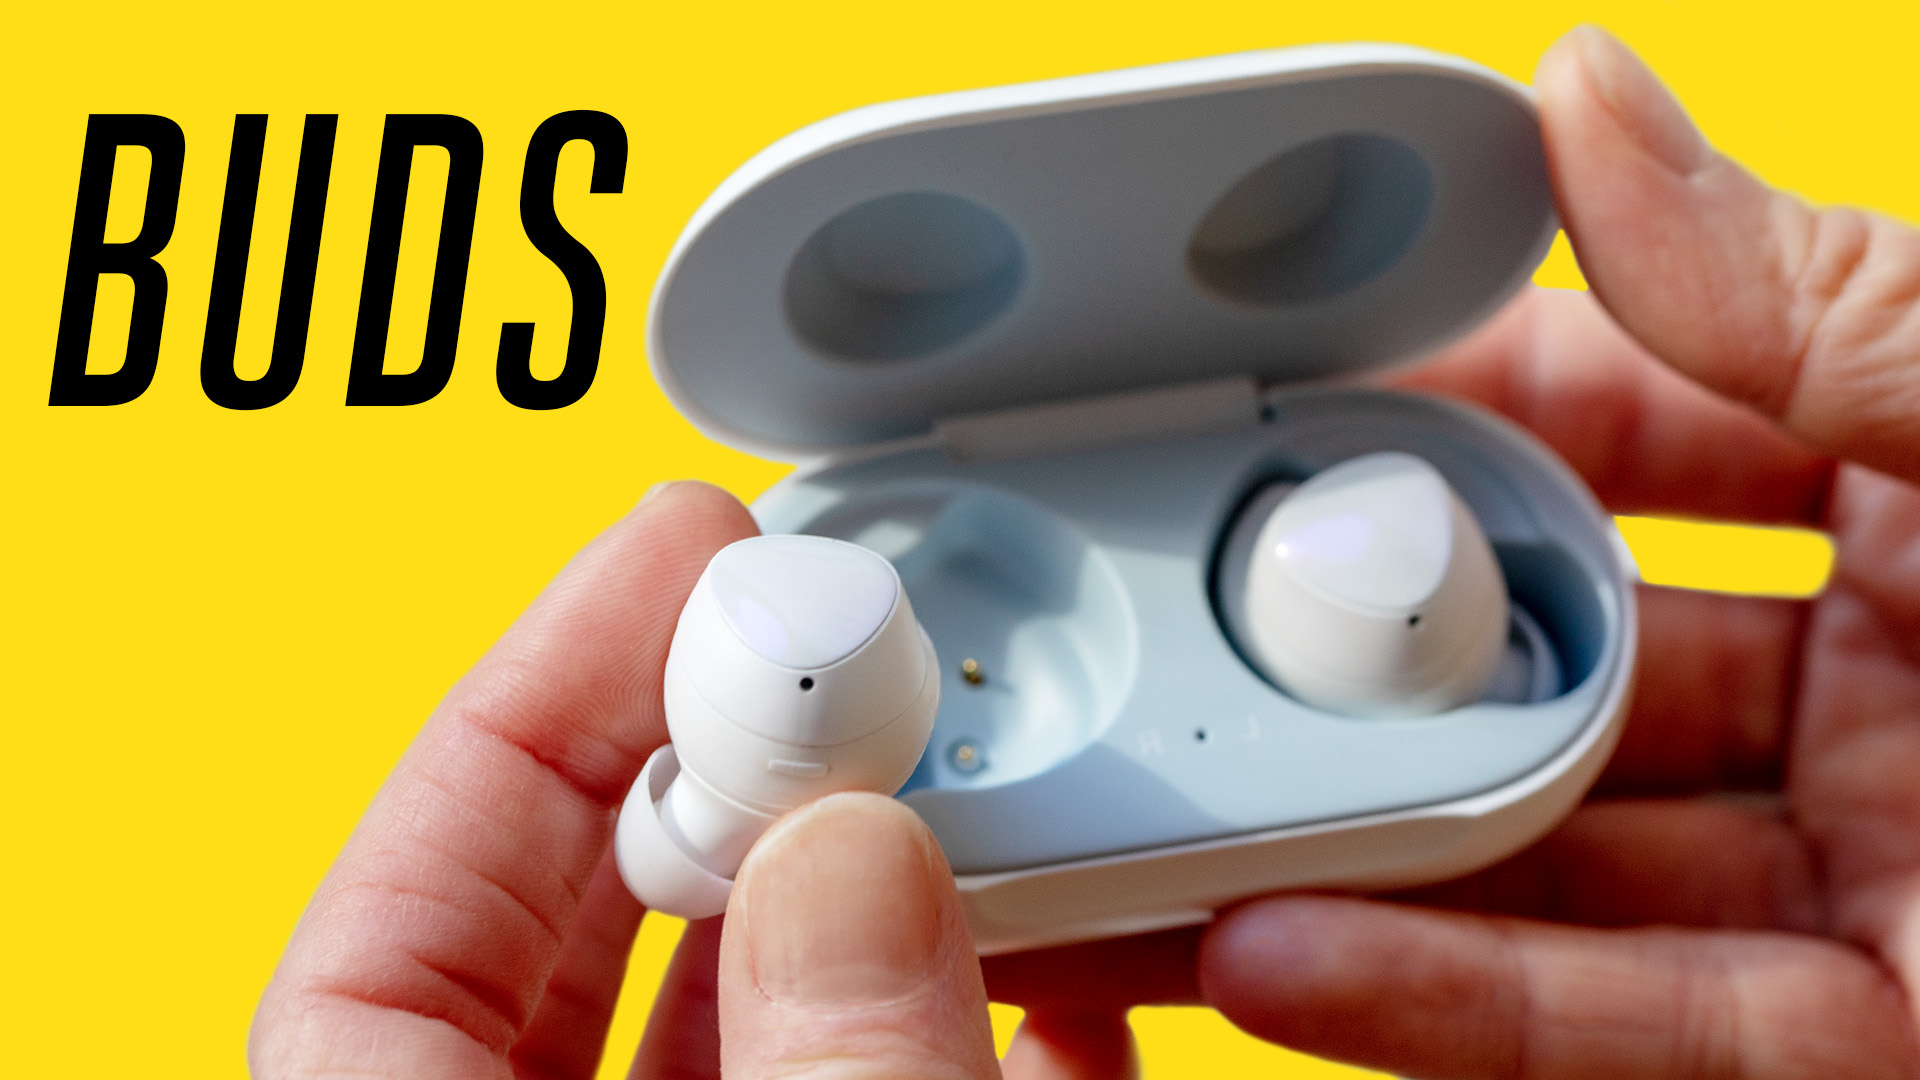 Samsung Galaxy Buds FE press renders, price surface